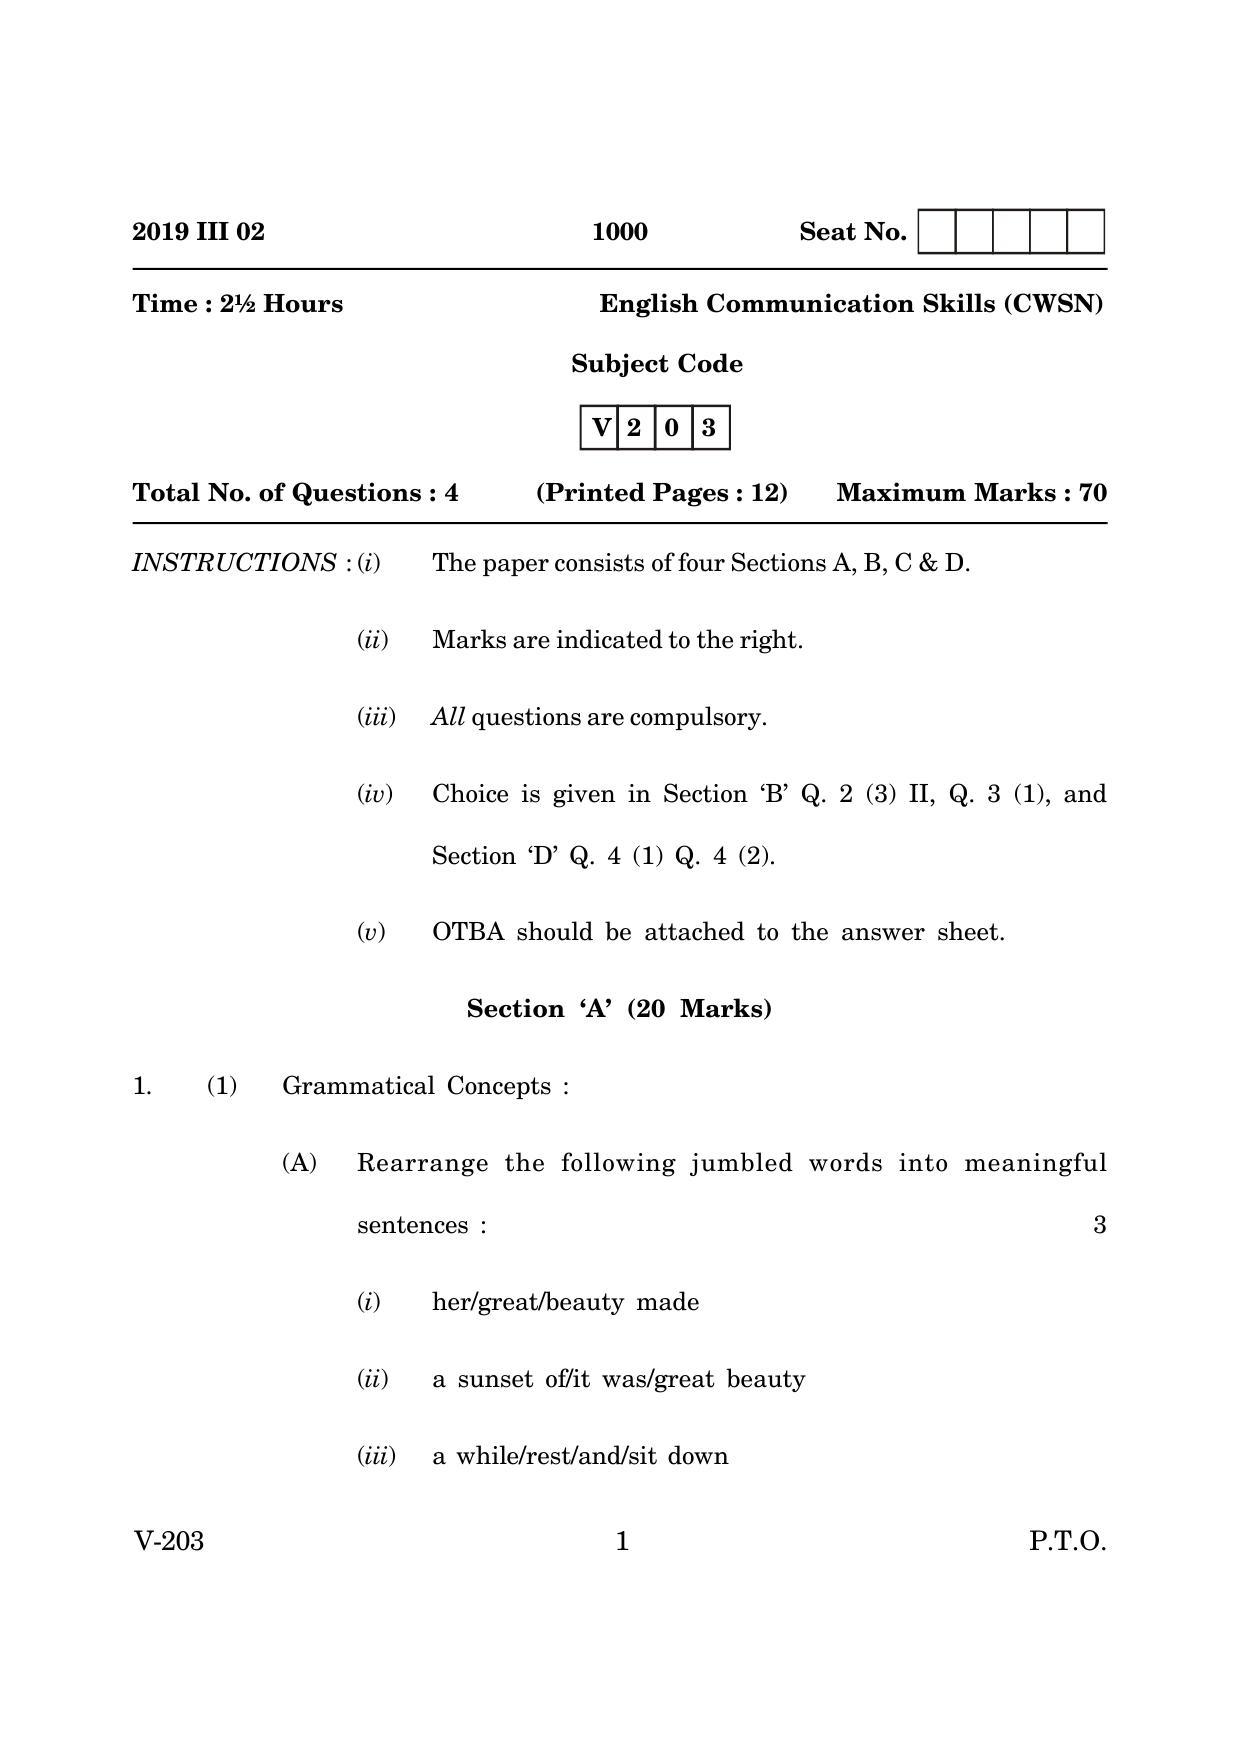 Goa Board Class 12 English Communication Skills  2019_0 (March 2019_0) Question Paper - Page 1